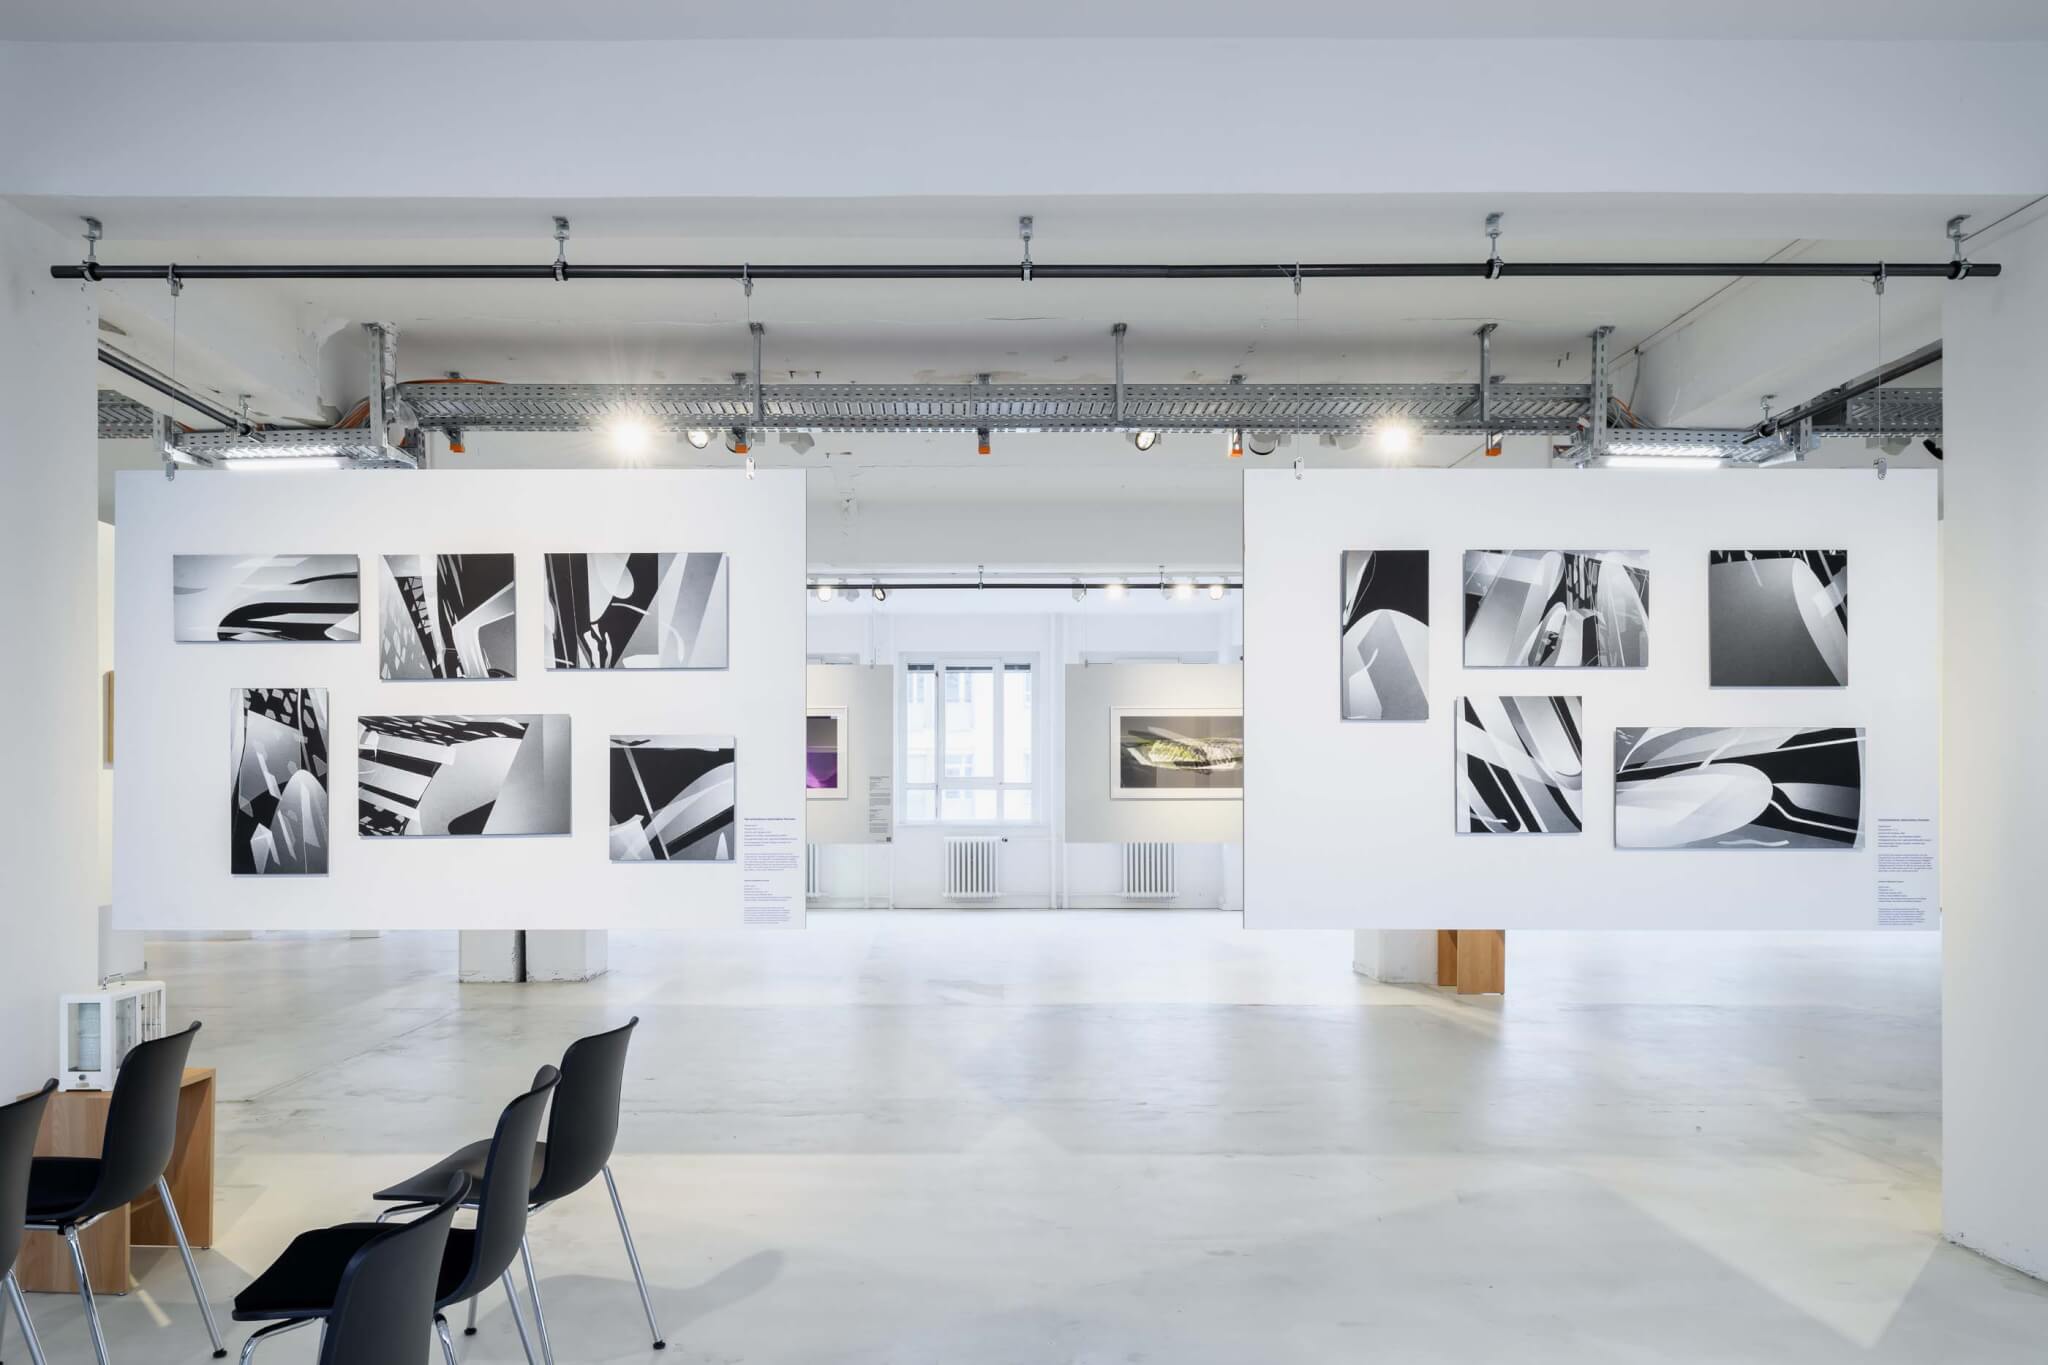 view of exhibition space with architectural drawings on display